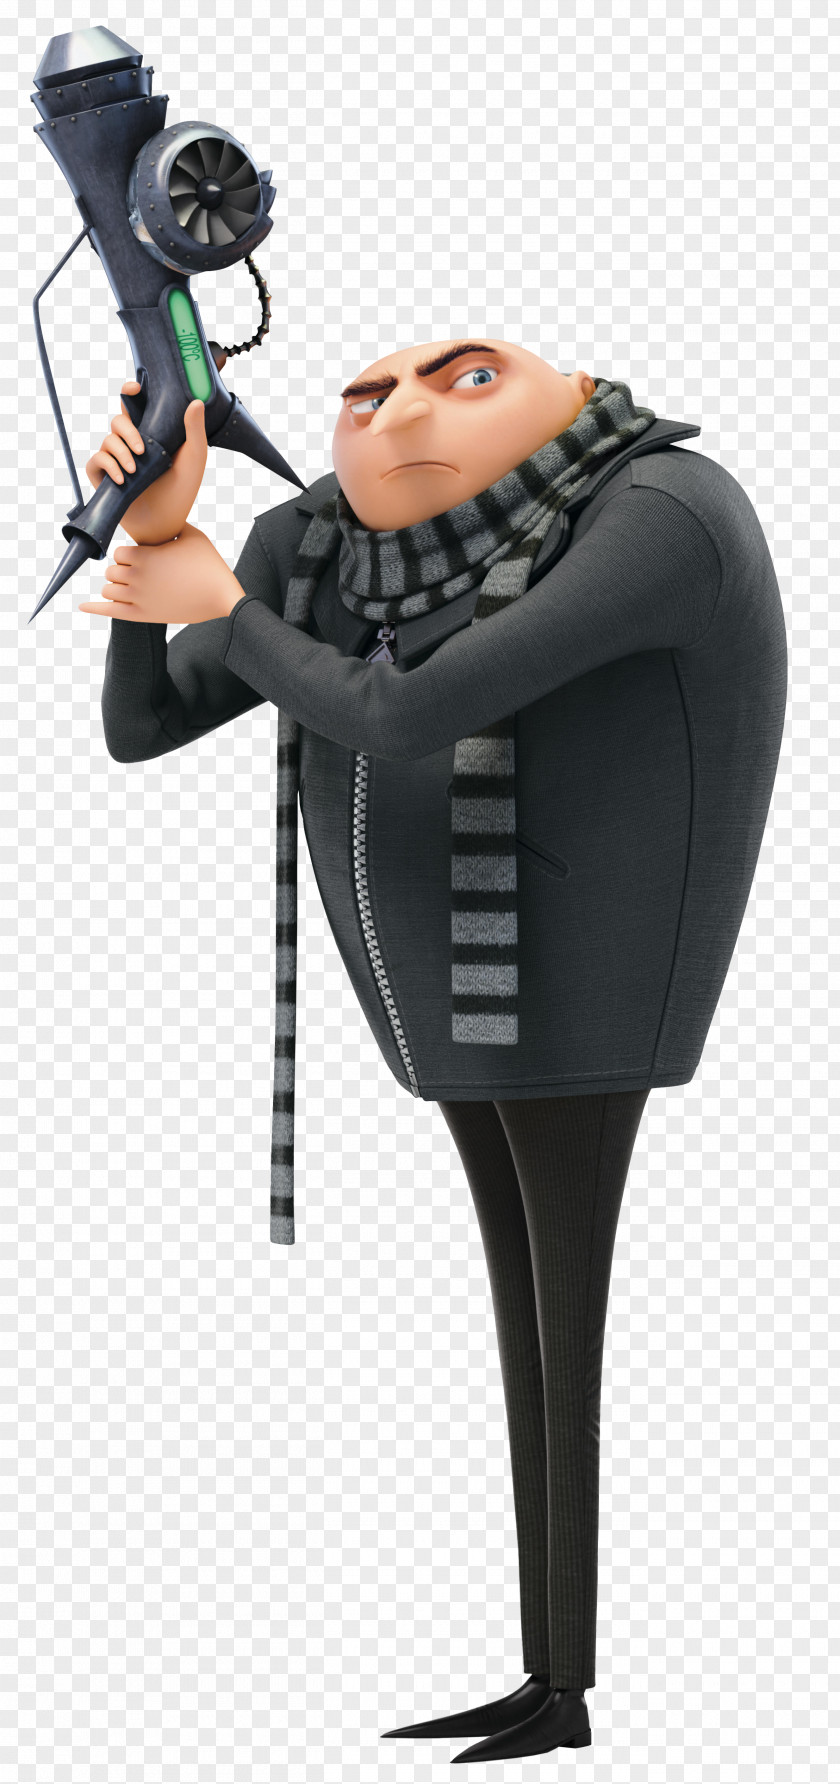 Gru Despicable Me Clip Art Image Steve Carell Marlena Felonious Universal Pictures PNG